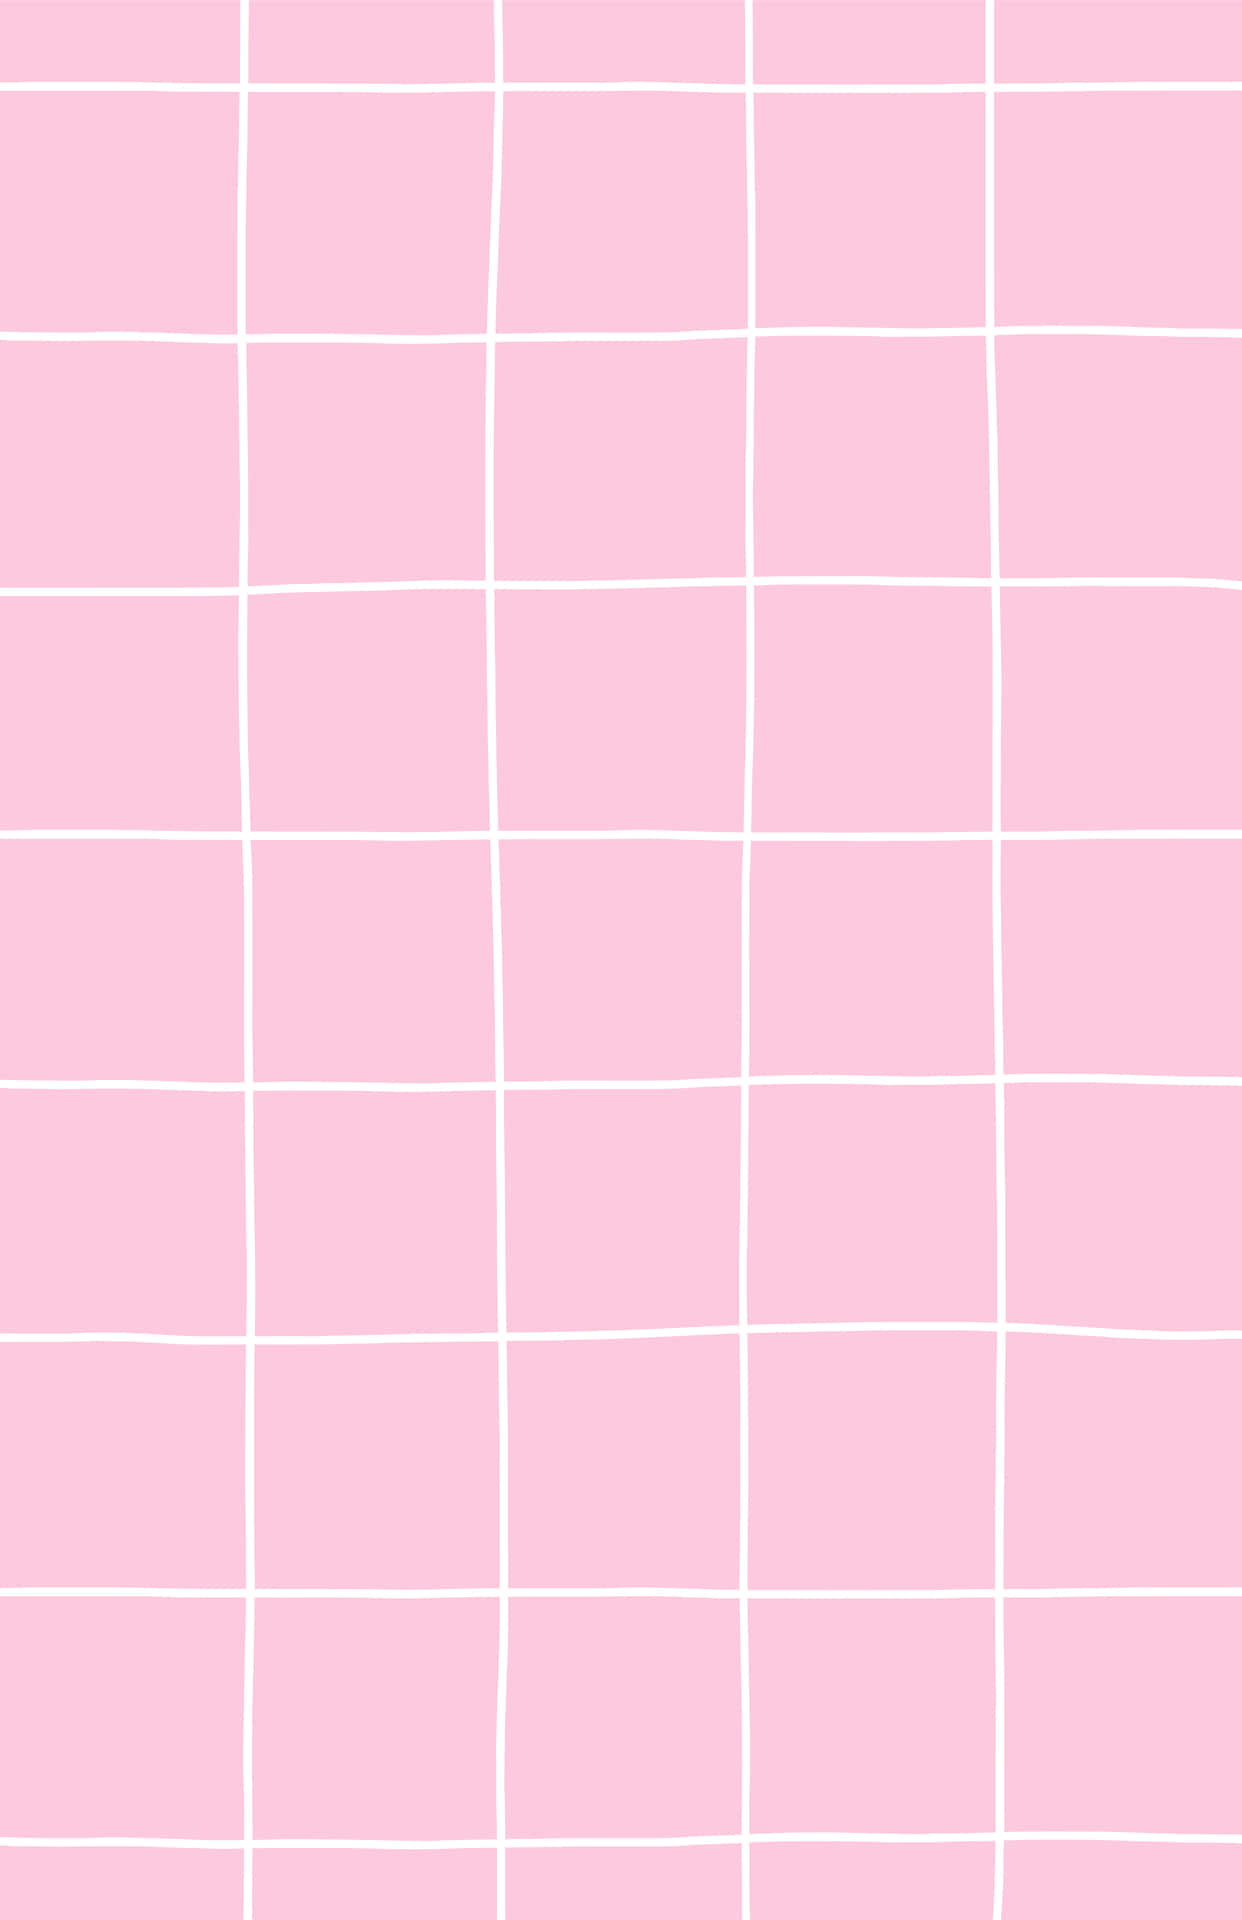 Neon pink grid patterned background  free image by rawpixelcom  katie   Pastel pink grid wallpaper Grid wallpaper Background patterns